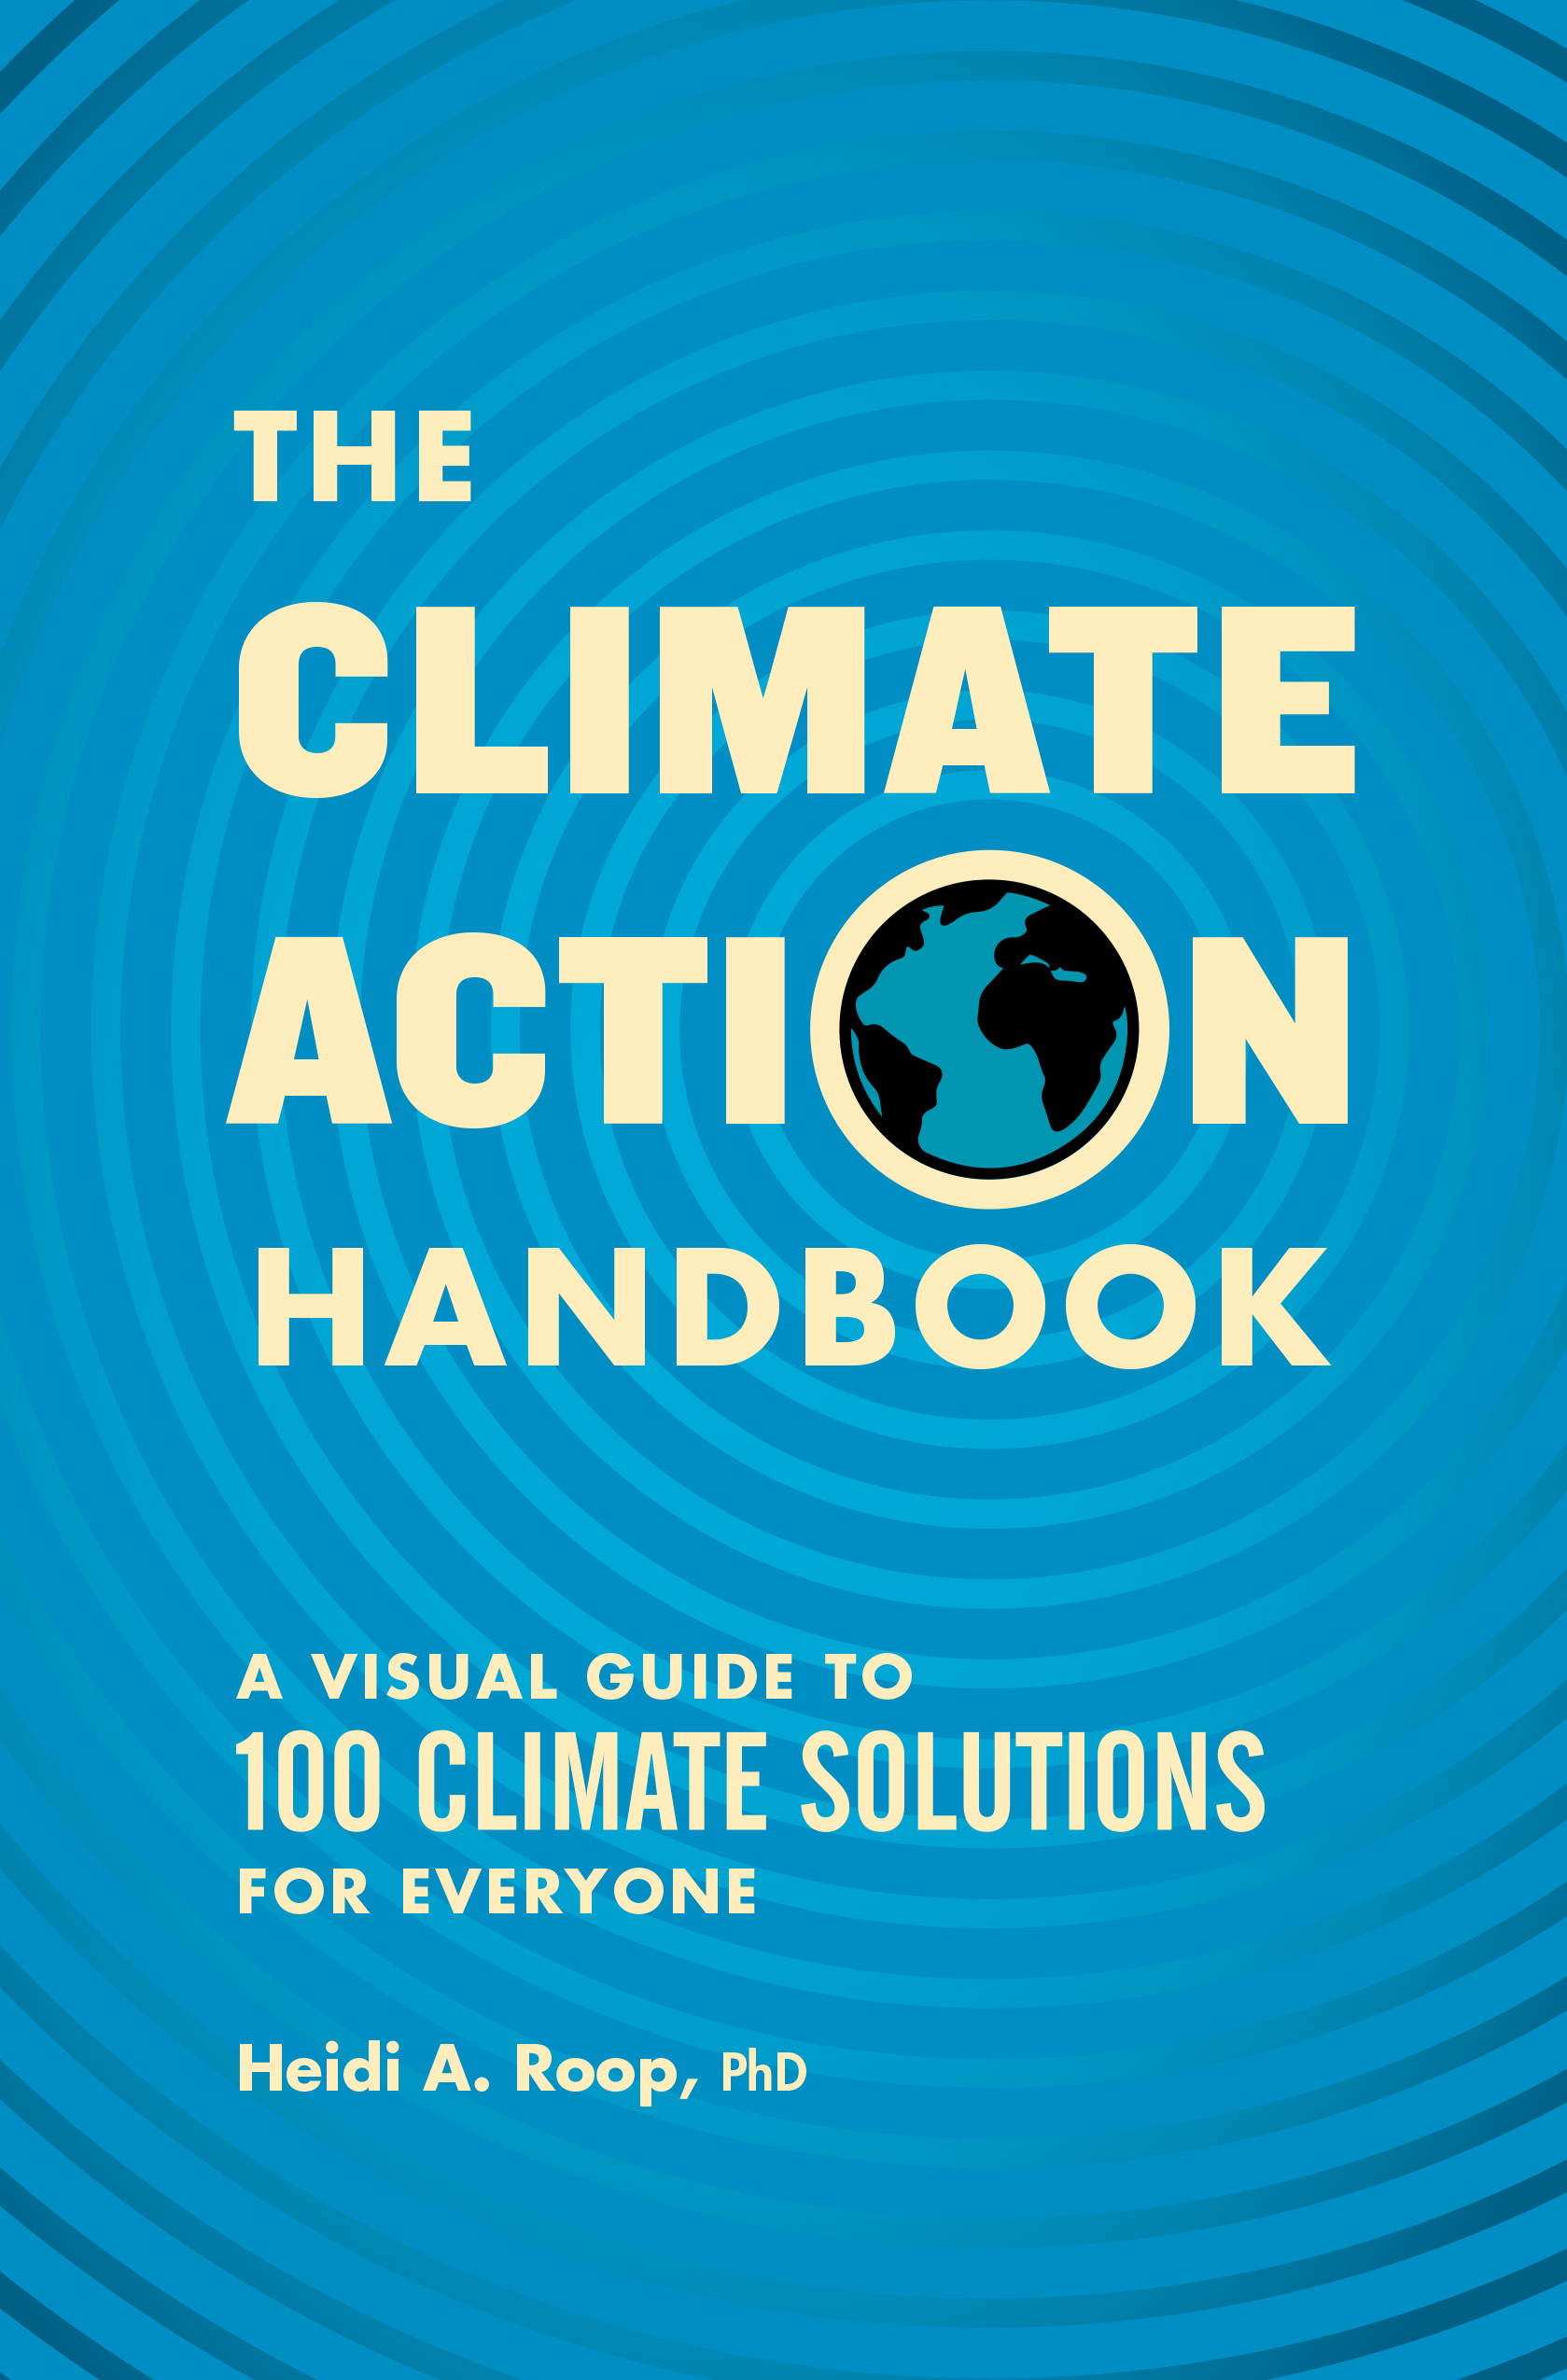 a book cover reading "the climate action handbook" 